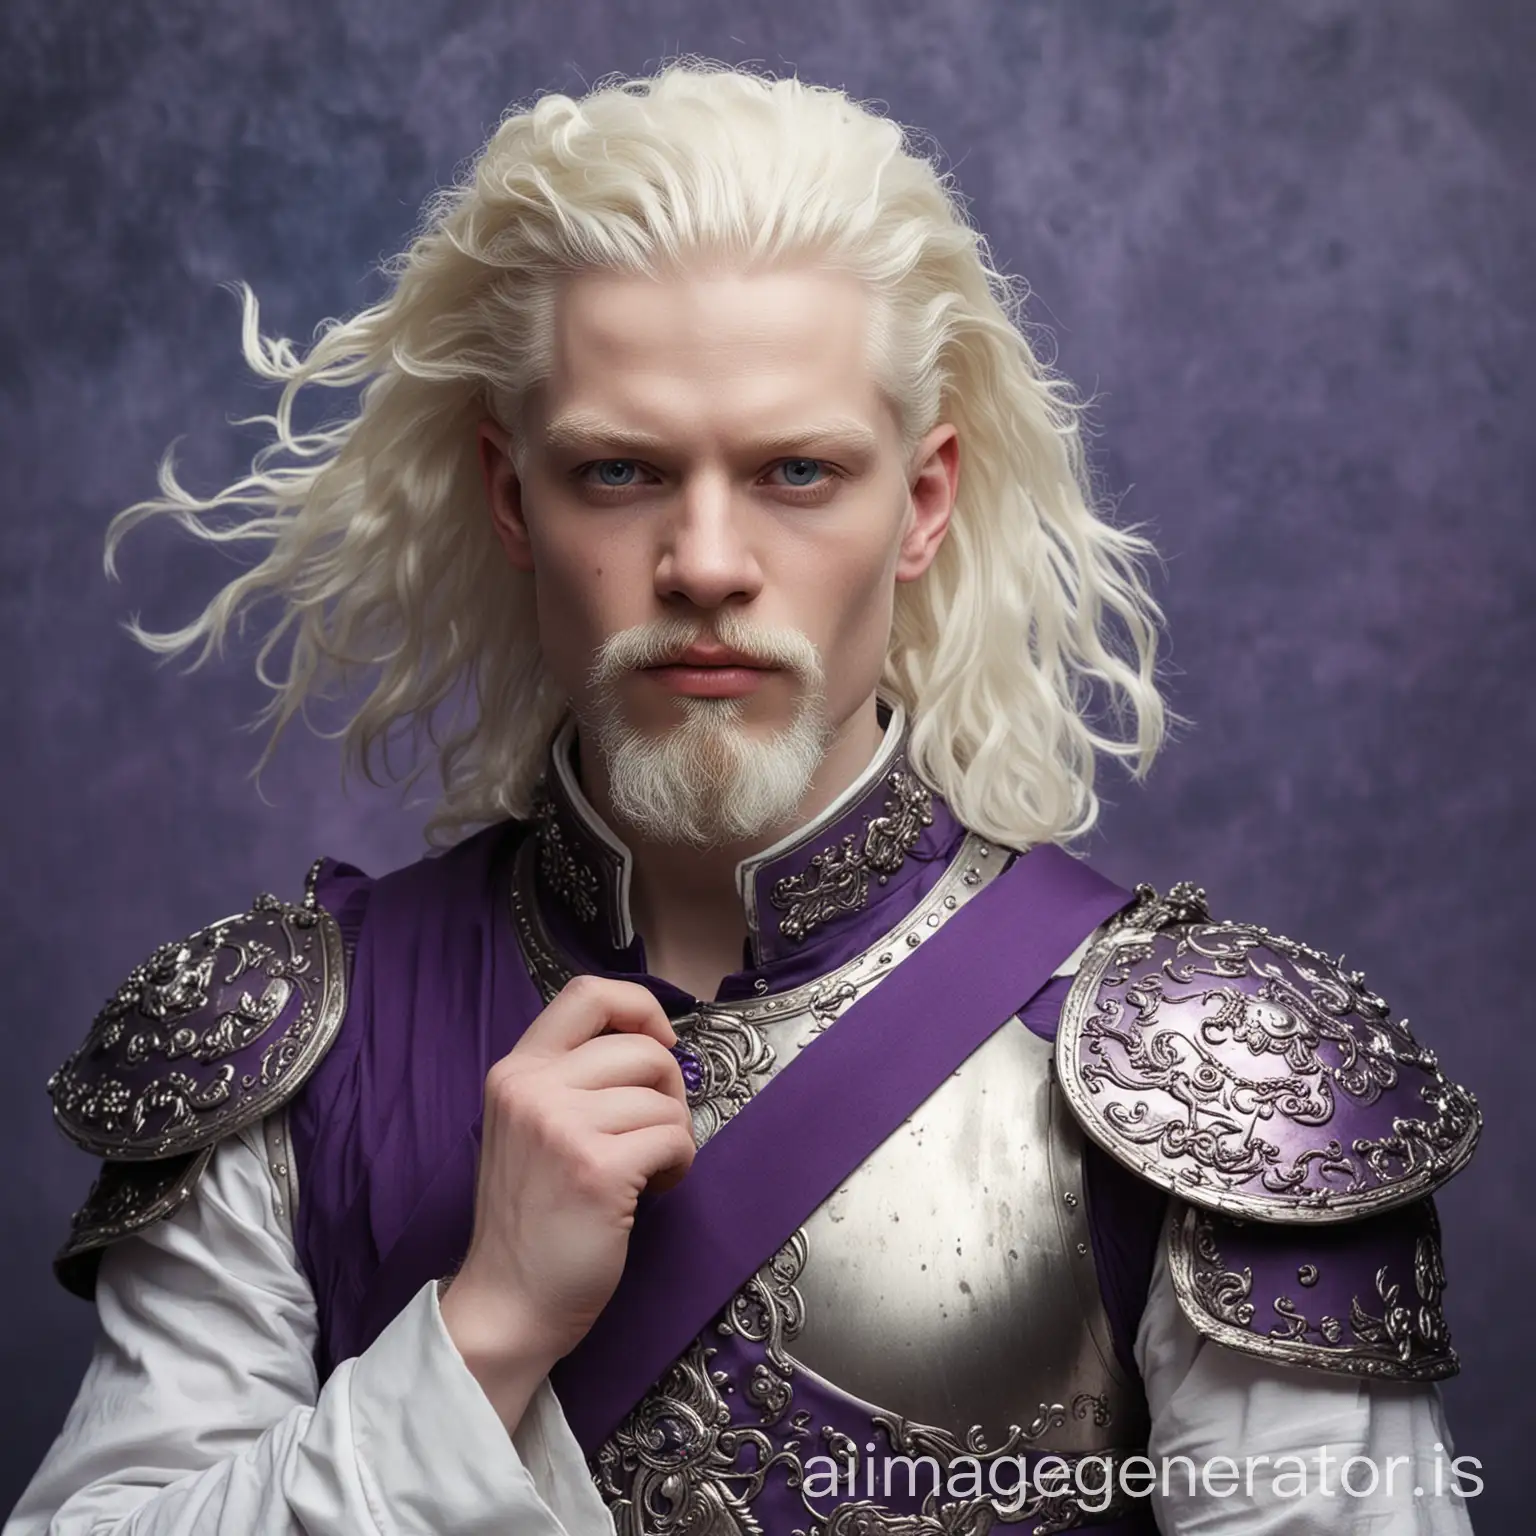 real photo. Real and natural image. albino. Close up photo. A 30 yearold young man. He puffs . He has semi-long hair. a white Indian man. white hair, violet eyes and beard. He has an ancient violet belt. A strong man with strong arms. Tall boy. violet Armor. violet metal. A glorious man who held the violet scepter with his strong hand. love and enthusiasm violet dress. Blue Clouds background. Wind blowing and storm behind him.